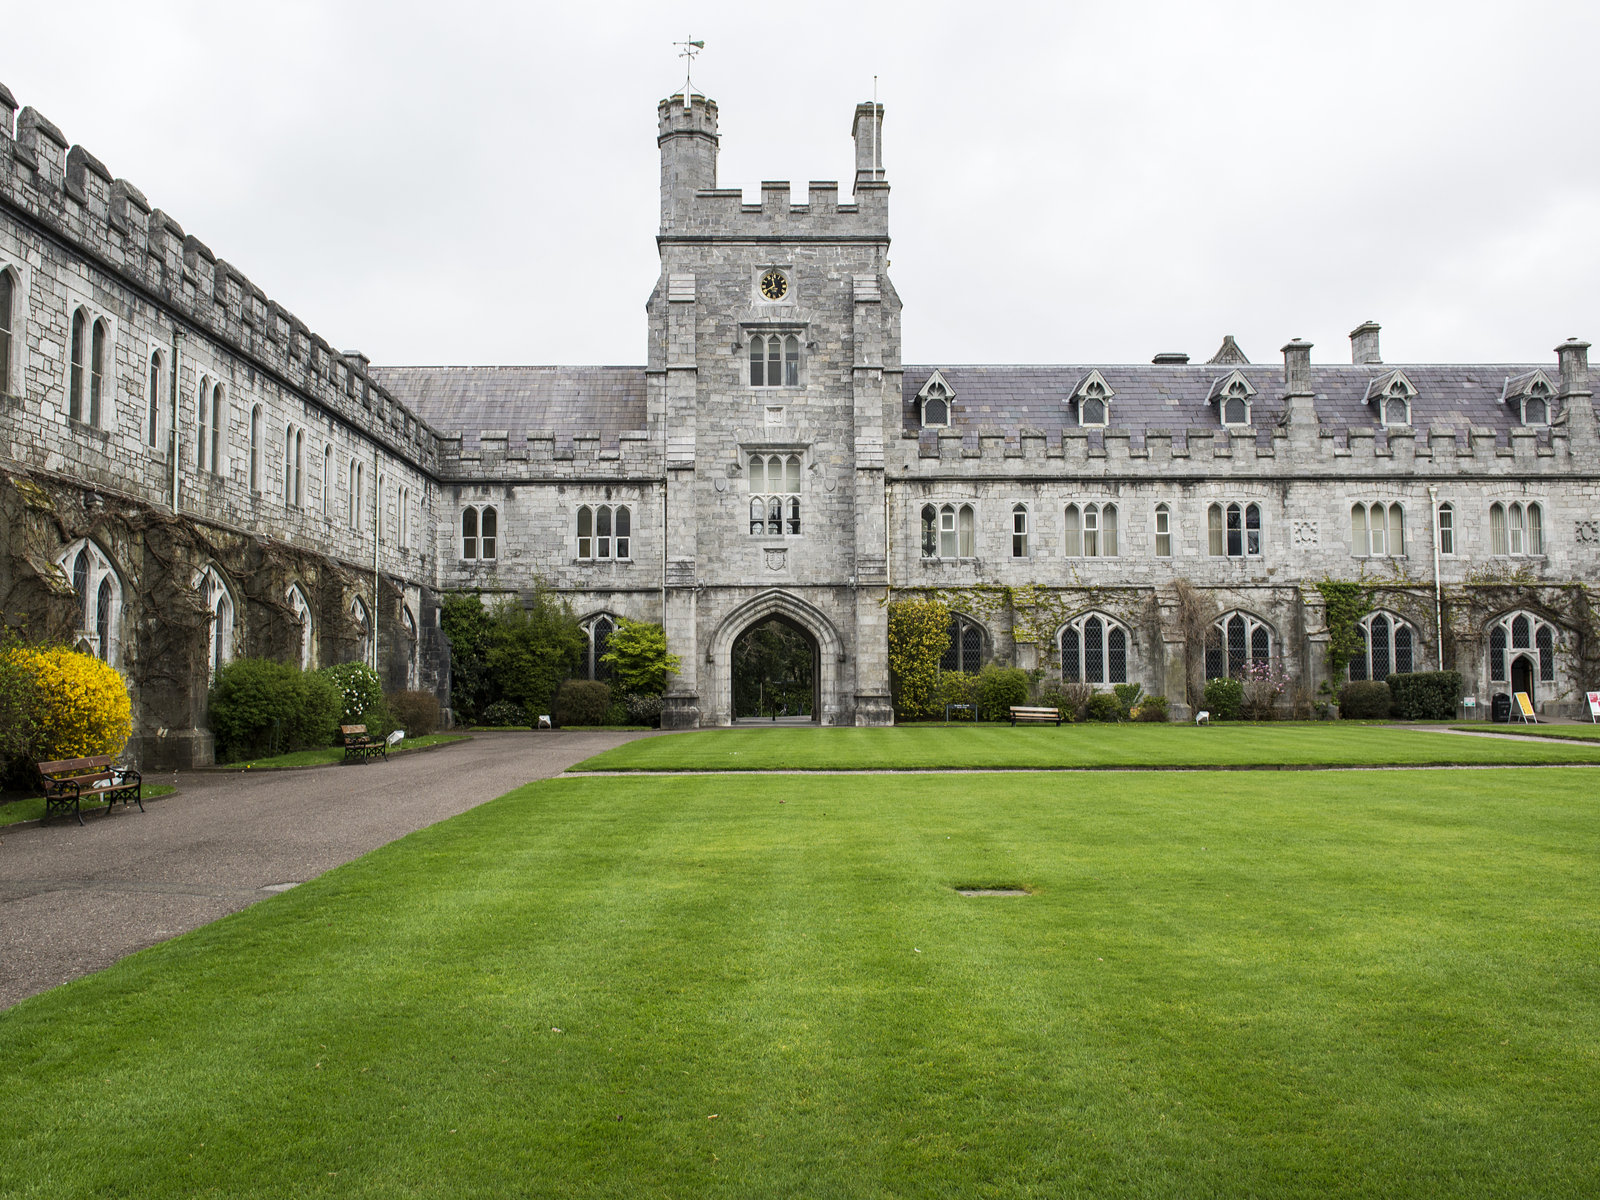 well-maintained green lawn at the University College Cork's quadrangle, one of the best universities in Ireland, with its old long hall and clock tower